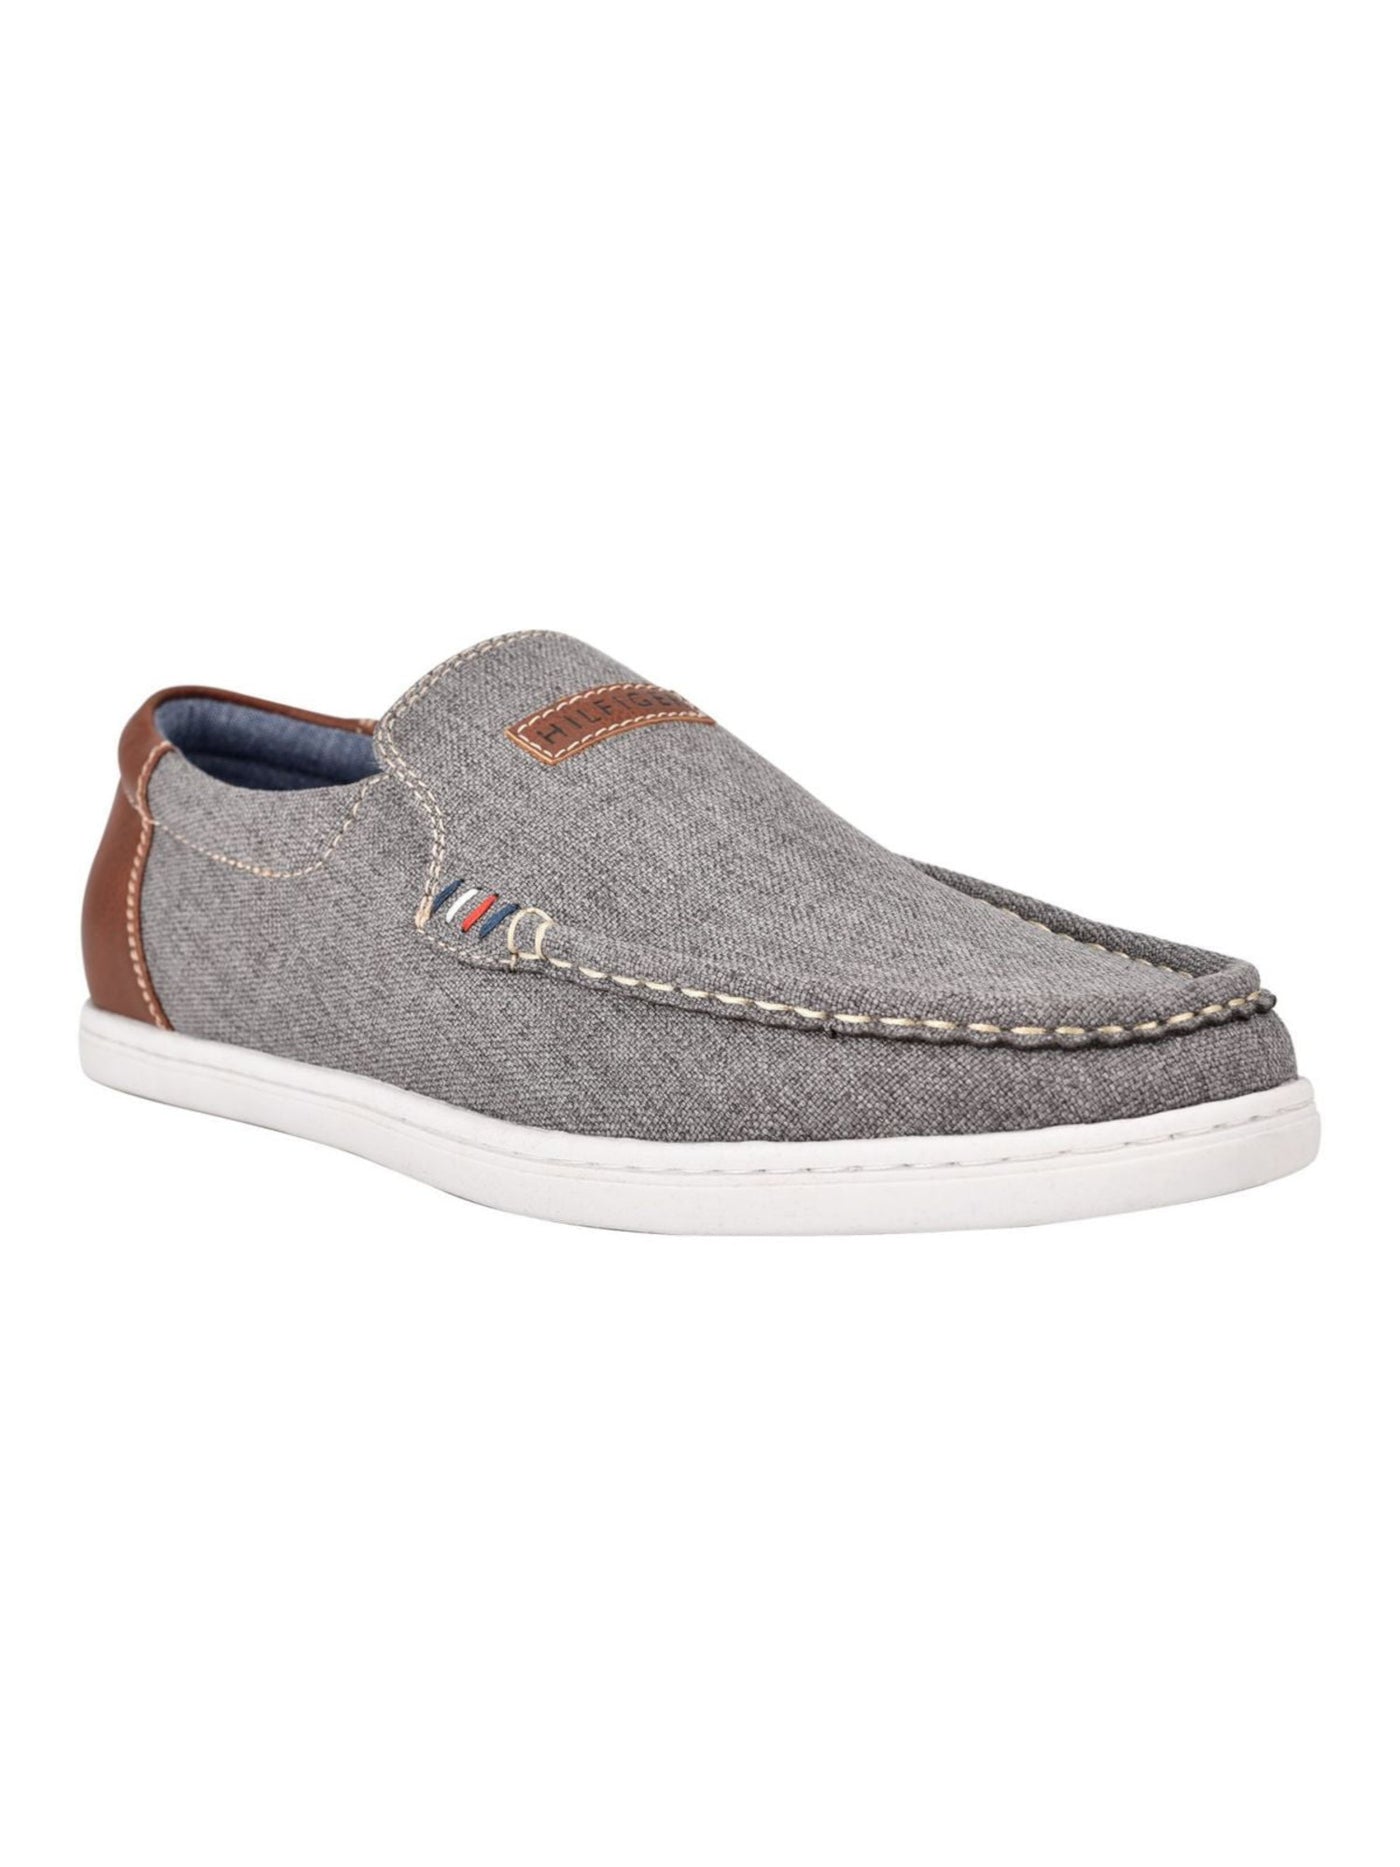 TOMMY HILFIGER Mens Gray Linen Cushioned Stretch Carlid Round Toe Slip On Sneakers Shoes 9